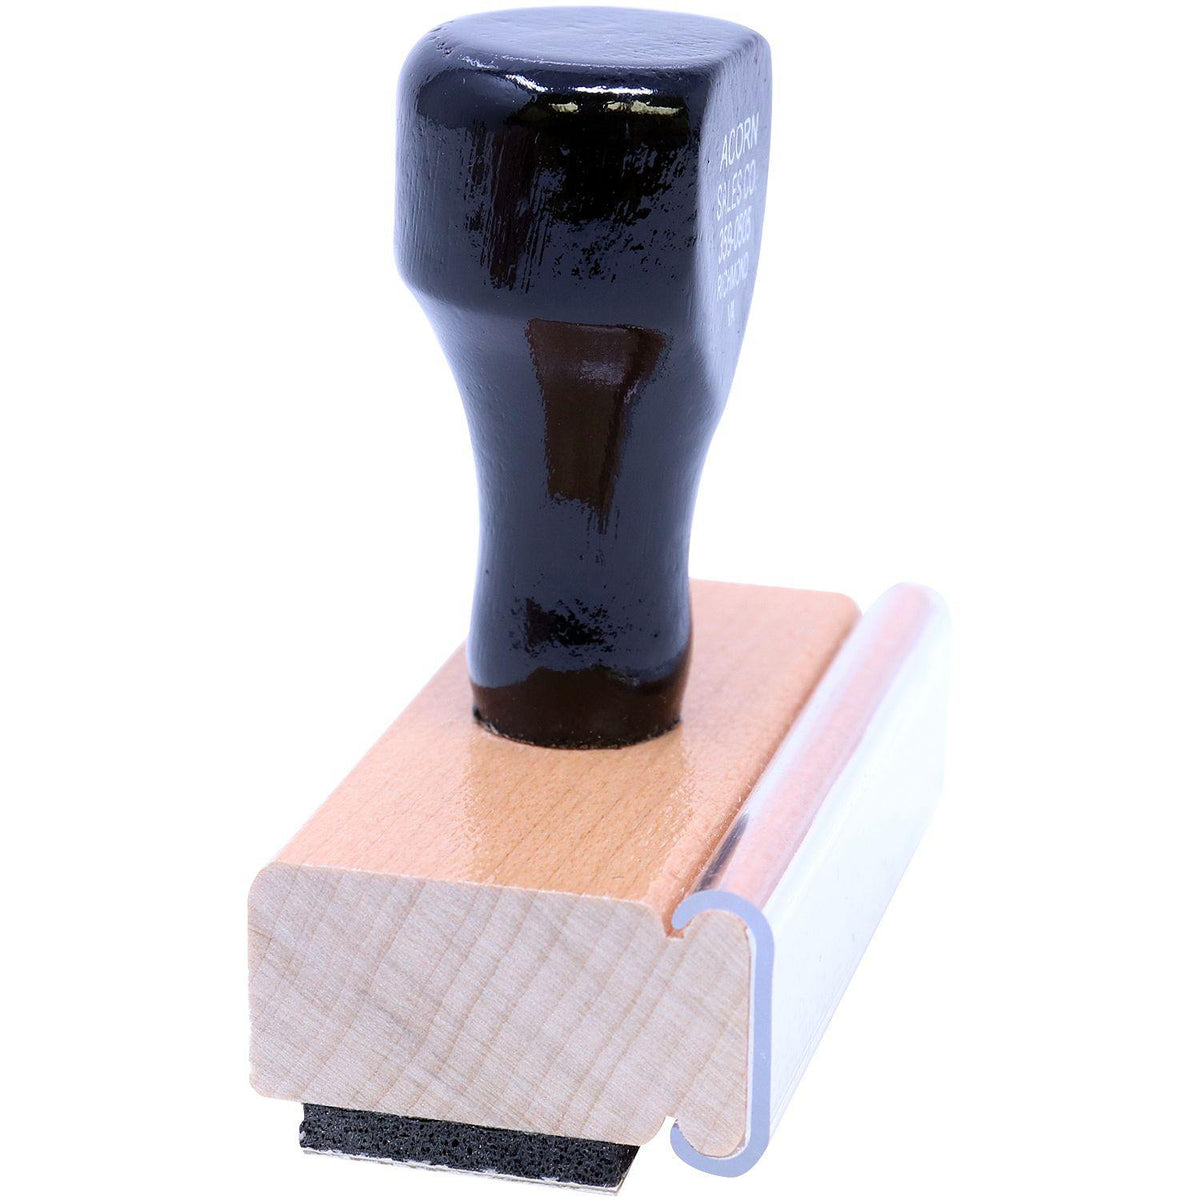 Side View of Credito Rubber Stamp at an Angle